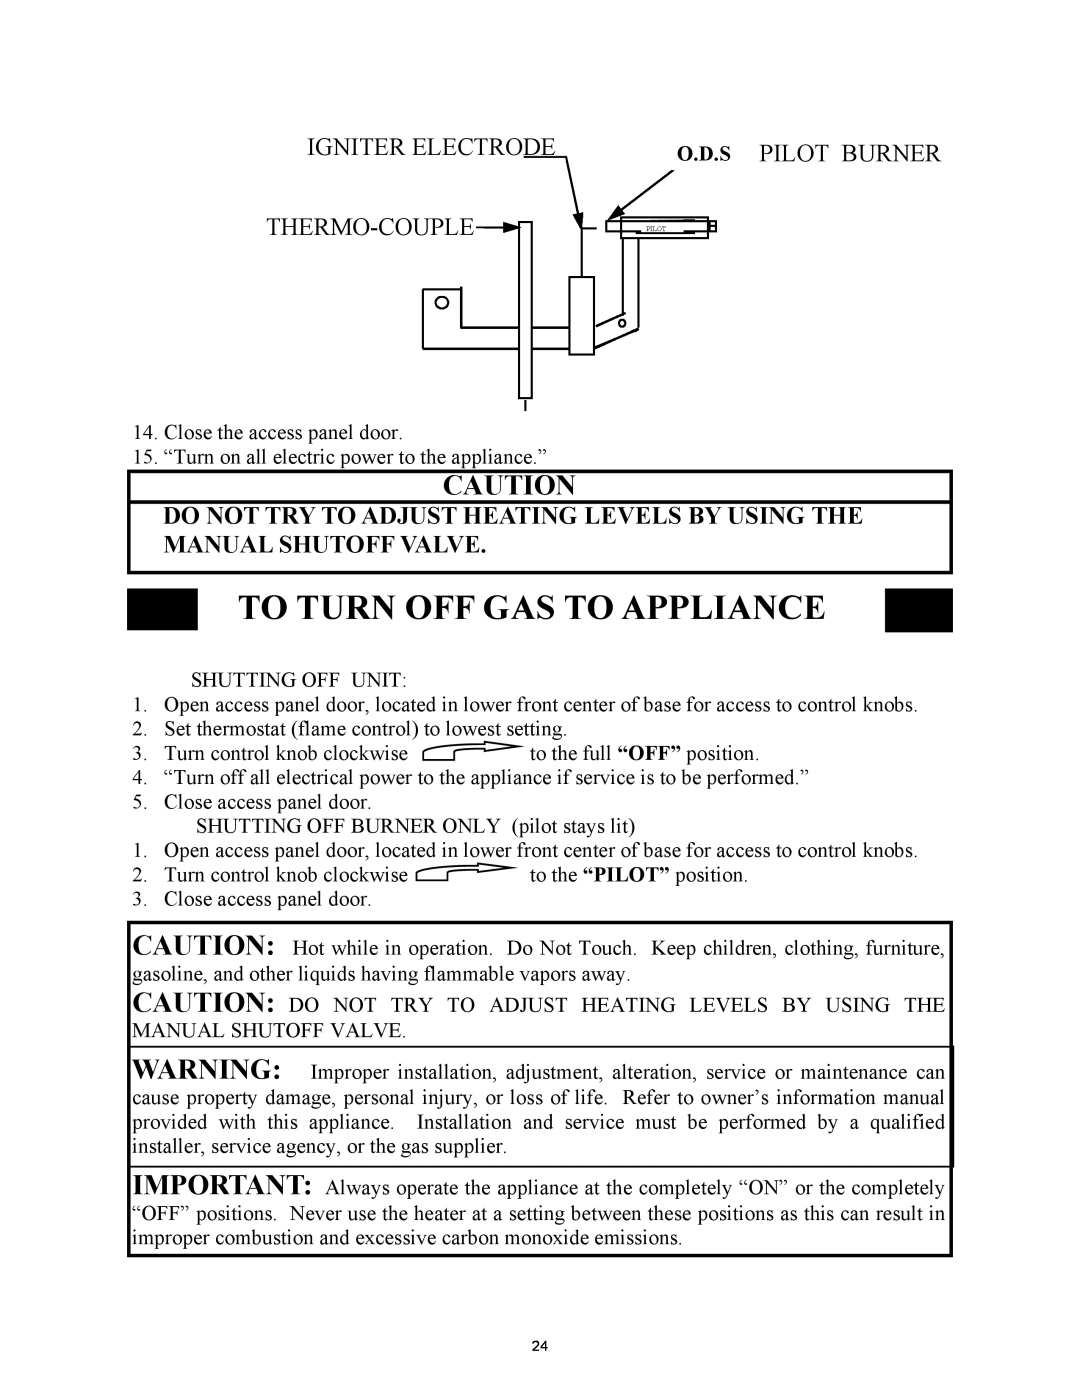 New Buck Corporation 1110 manual To Turn Off Gas To Appliance, Igniter Electrode Thermo-Couple, O.D.S Pilot Burner 